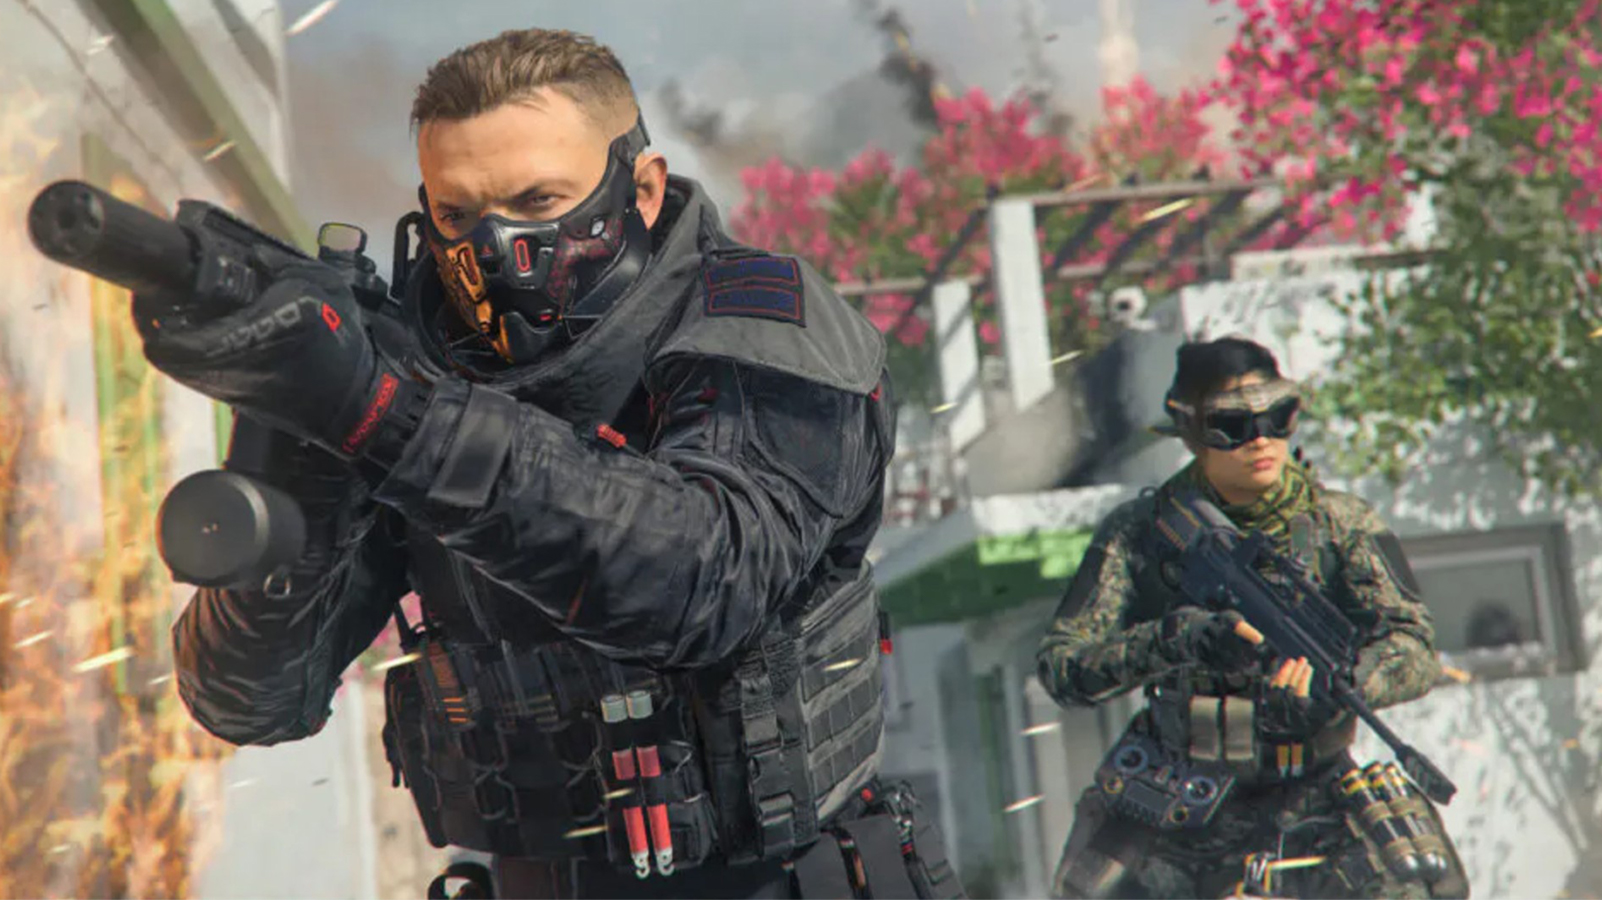 MW3 Ranked Mode coming mid-Season One but not at launch